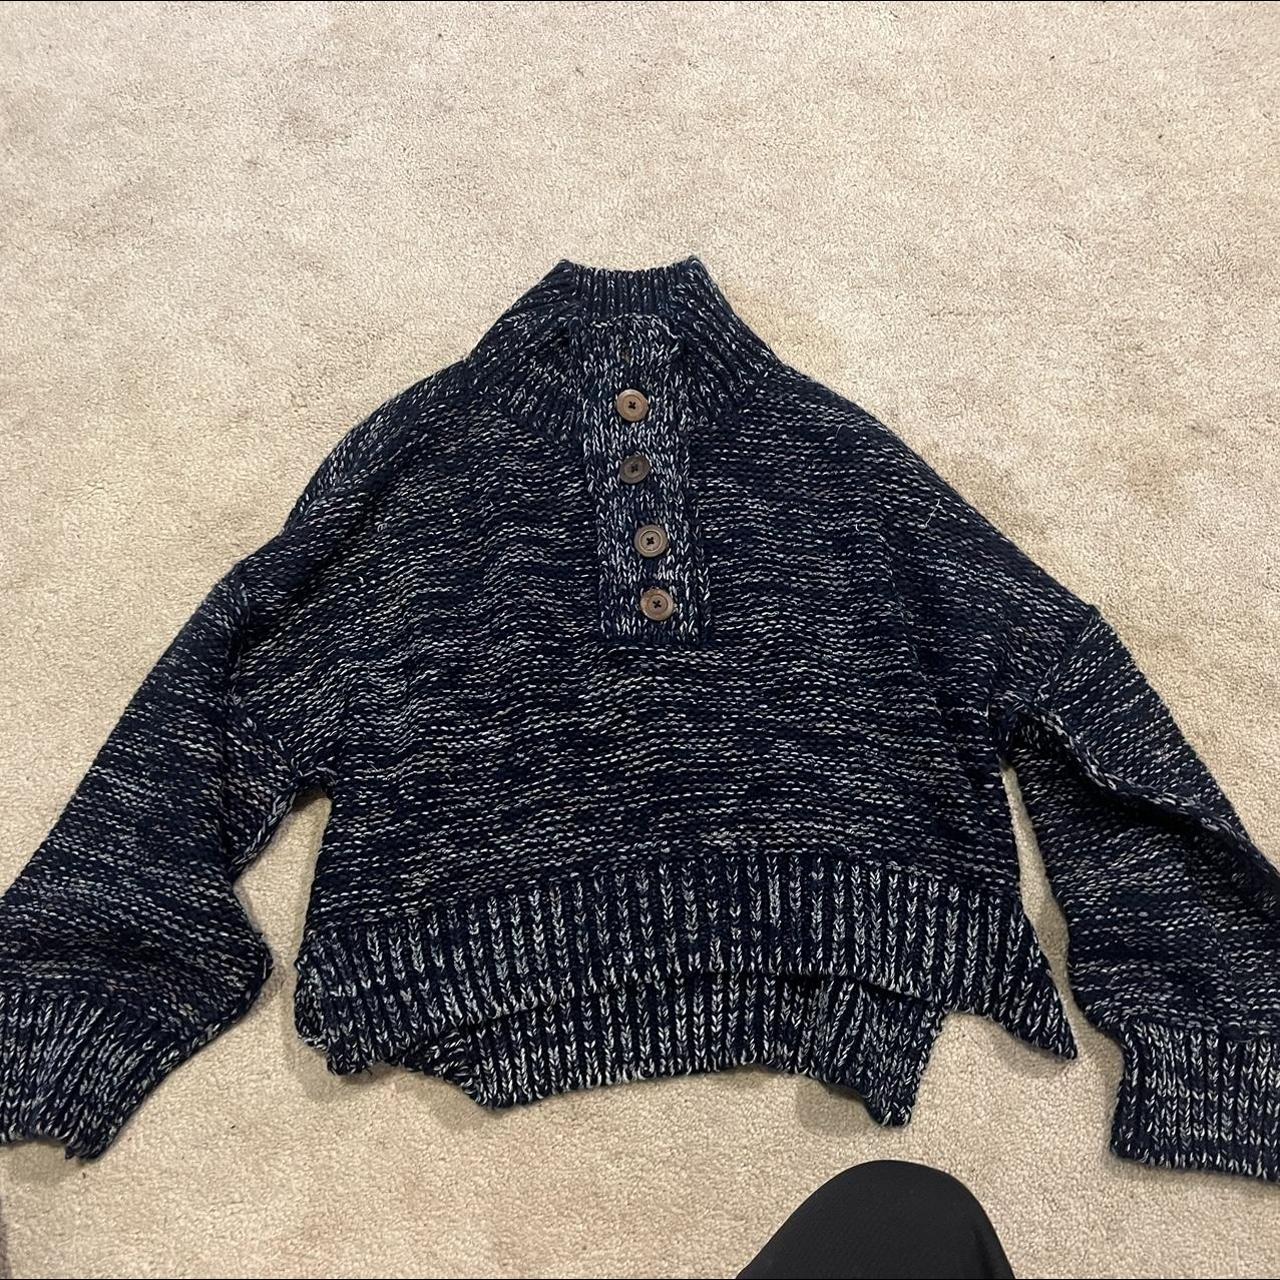 Big comfy sweater from Anthropologie's pilcro brand. - Depop